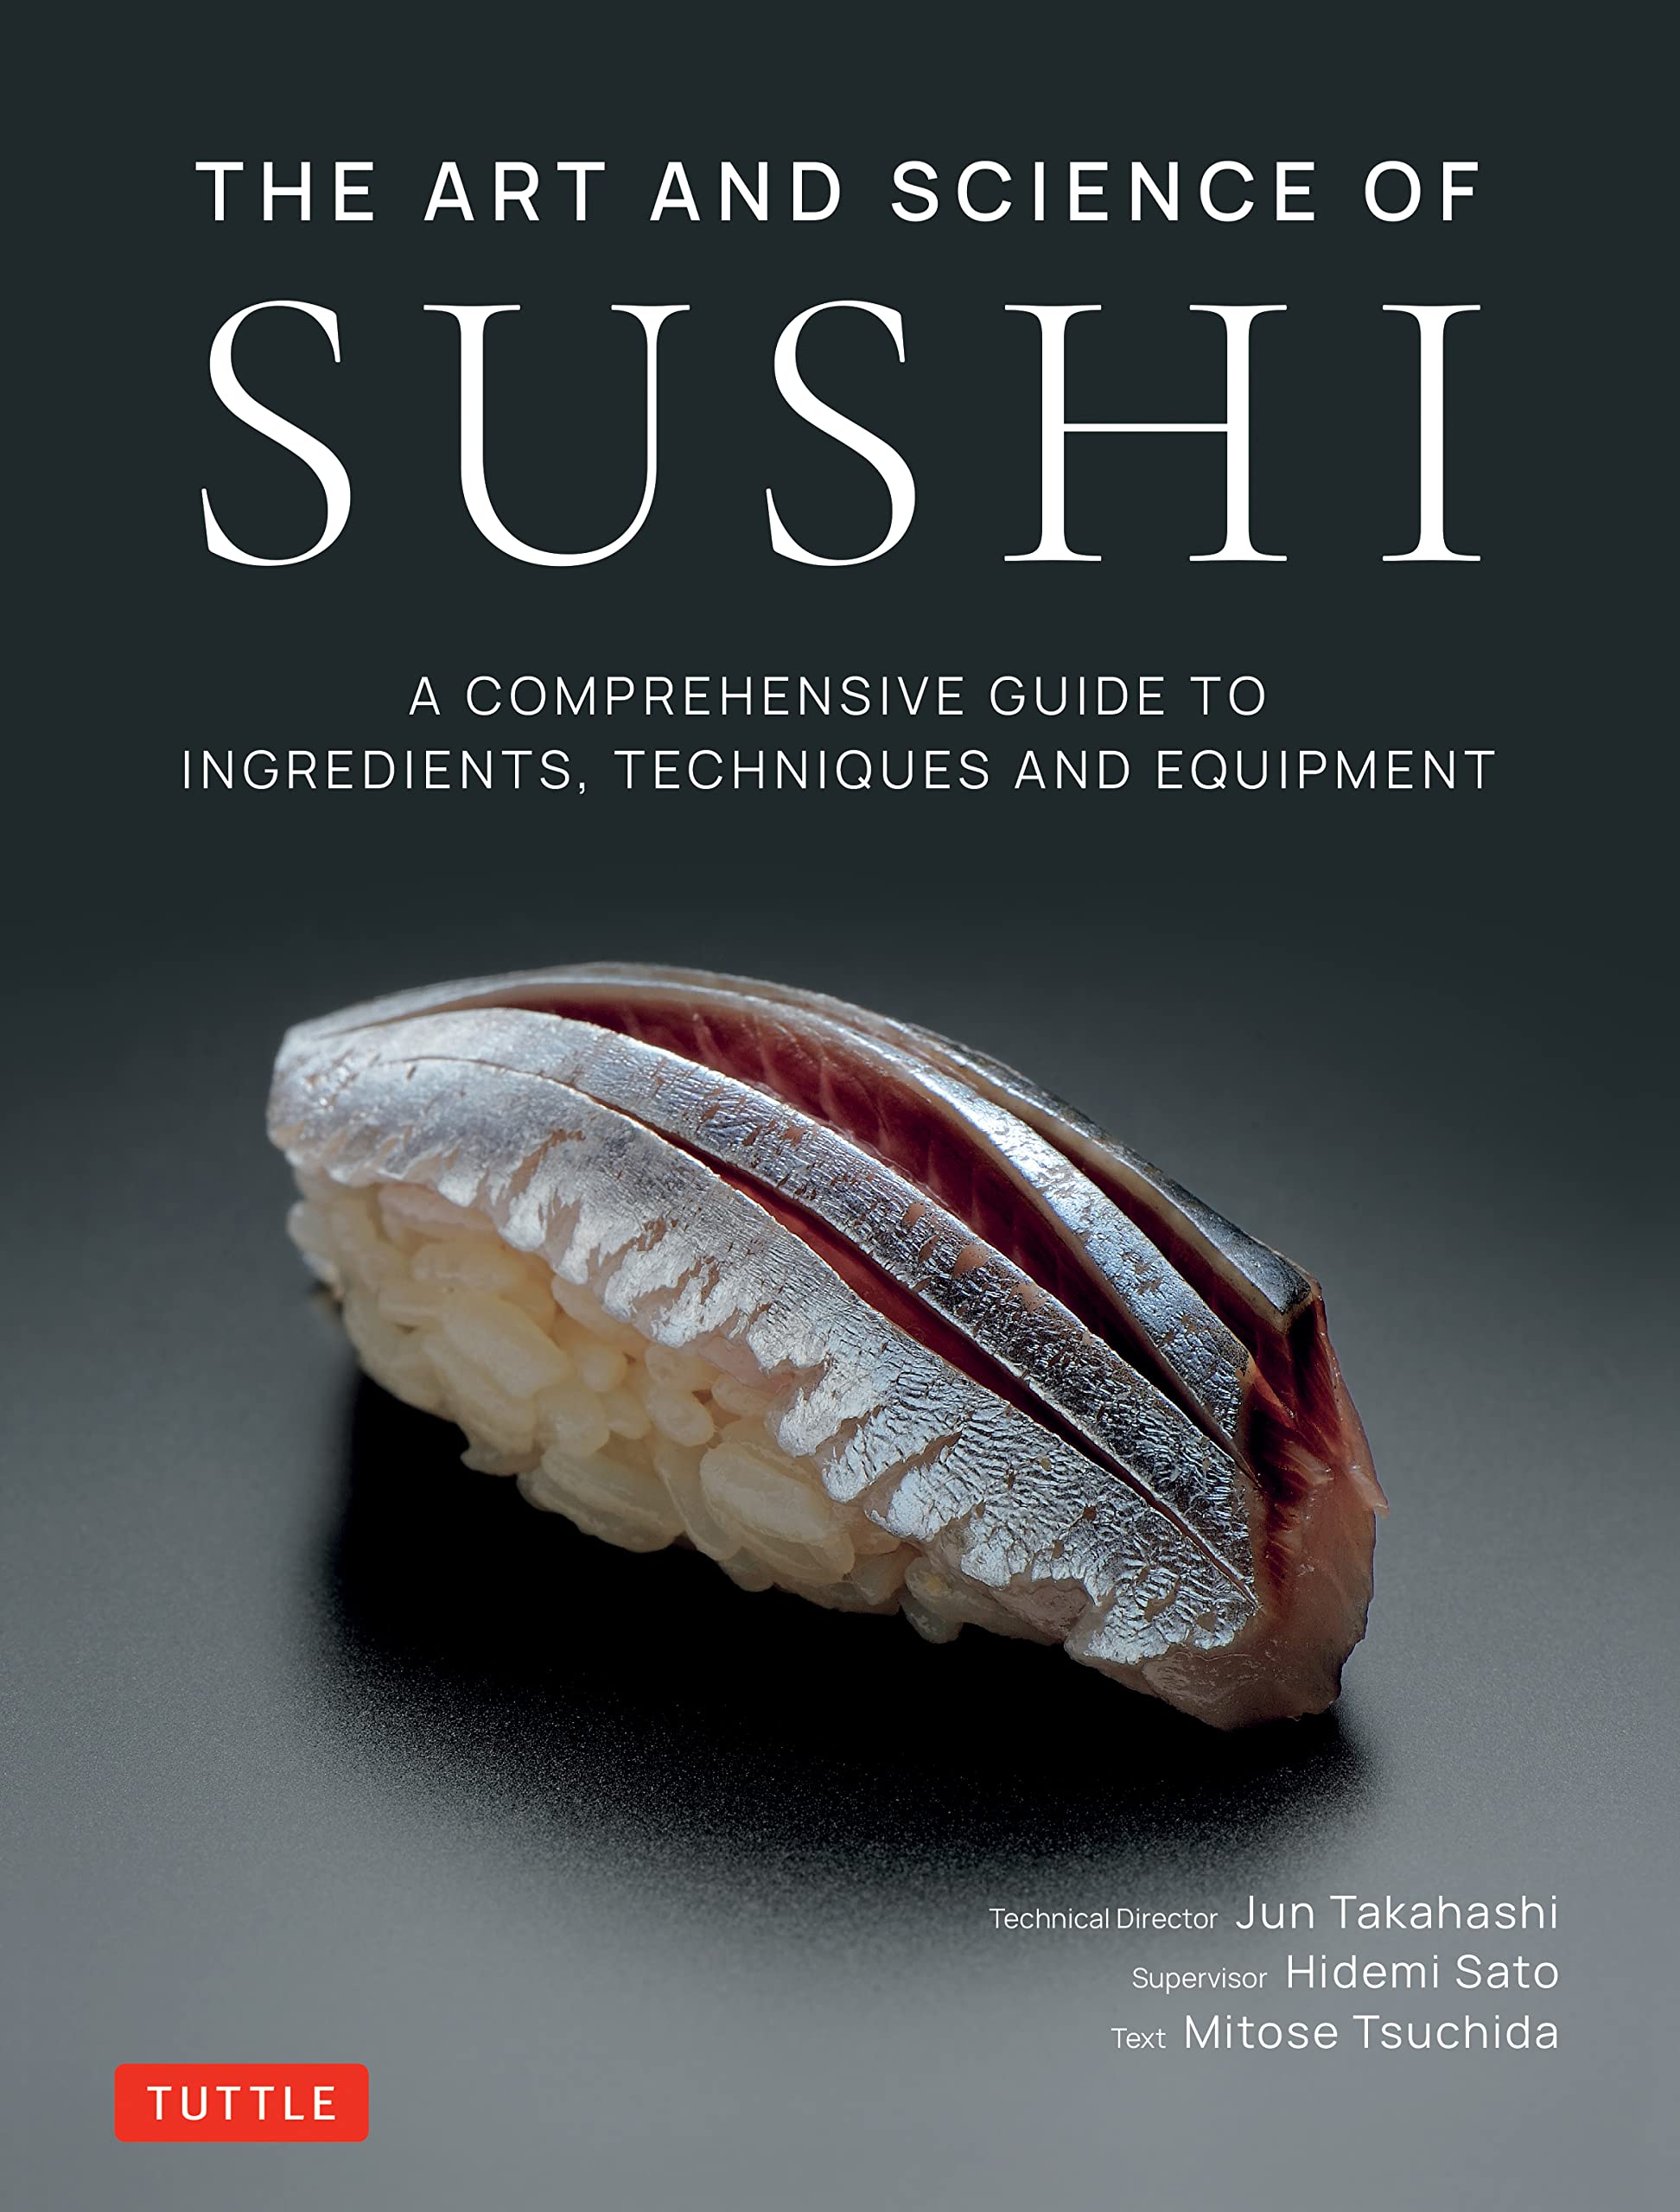 The Art and Science of Sushi: A Comprehensive Guide to Ingredients, Techniques and Equipment (Jun Takahashi, Hidemi Sato)